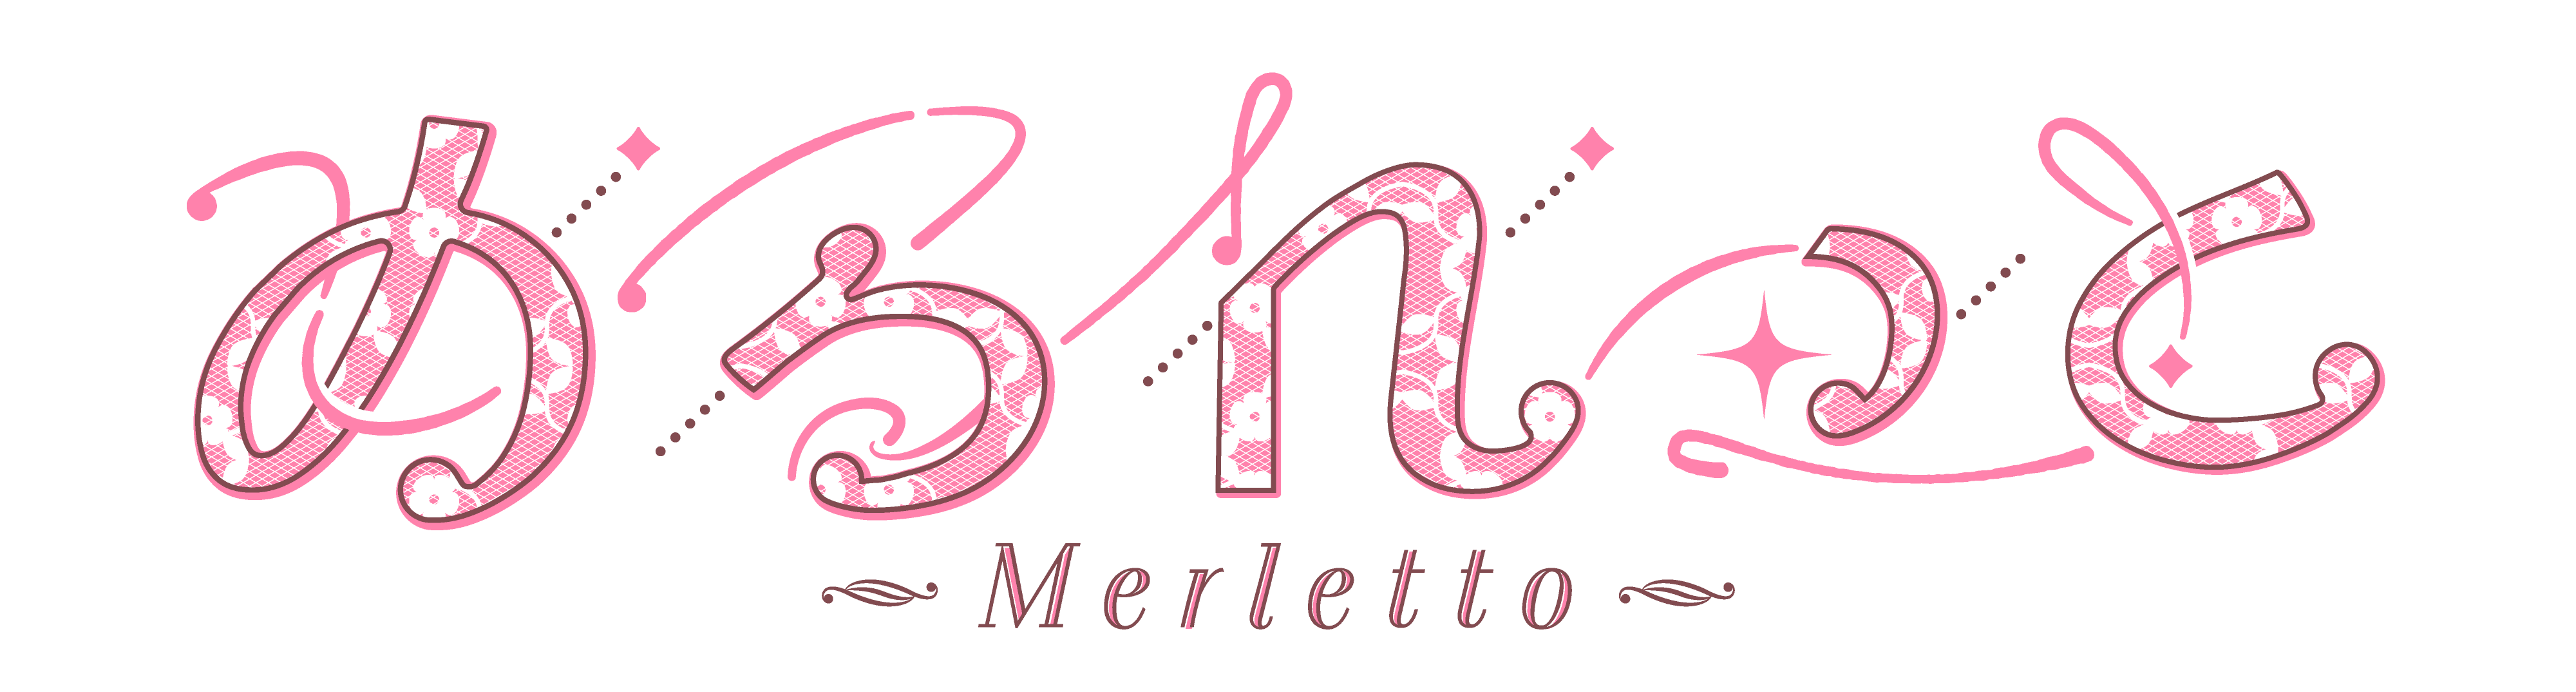 Merletto.png